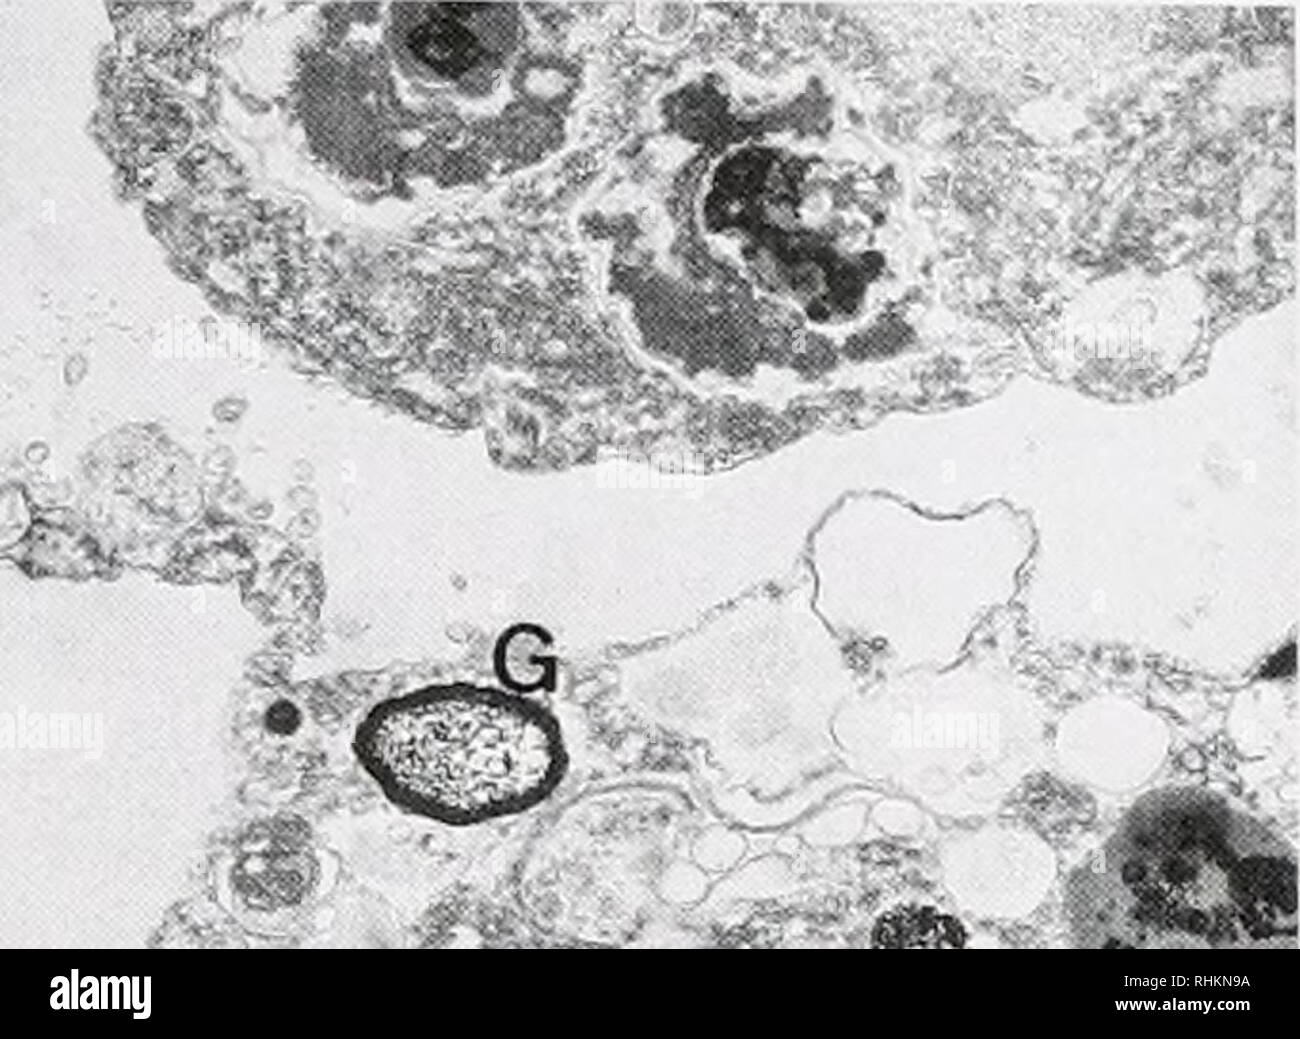 . The Biological bulletin. Biology; Zoology; Biology; Marine Biology. .4:.:* ' • •.--, • M I »•• .X Figure 19. Basal apparatus ot a choanocyte in the juvenile sponge of Leucosolenia lti.a about 72 h after settlement. C: collar. G: Golgi apparatus. Scale bar = 1 /urn. Figure 20. Fuzzy coat (F) of a choanocyte in the juvenile .sponge of Leucosolenia lau about 72 h after settlement. Scale bar = 0.5 /am. Figure 21. Scleroblast in the juvenile sponge of Leucosolenia la.a about 72 h after settlement. G glutinous granule. S: space occupied by a triradiate spicule. Scale bar = 2 jim. Figure 22. Two Stock Photo